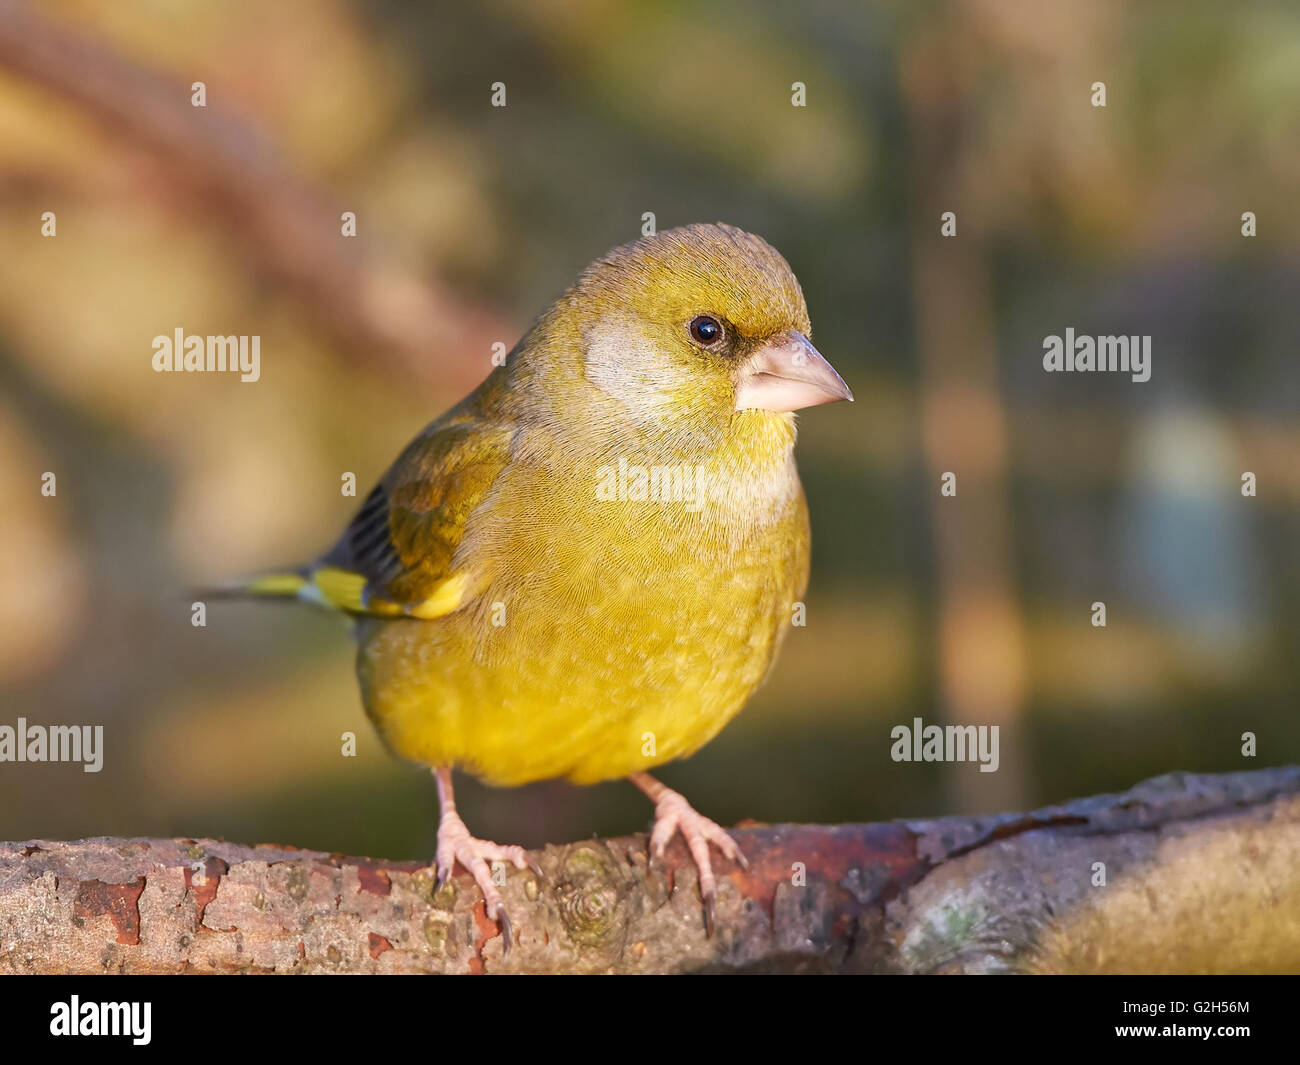 Greenfinch resting on a branch in its habitat Stock Photo